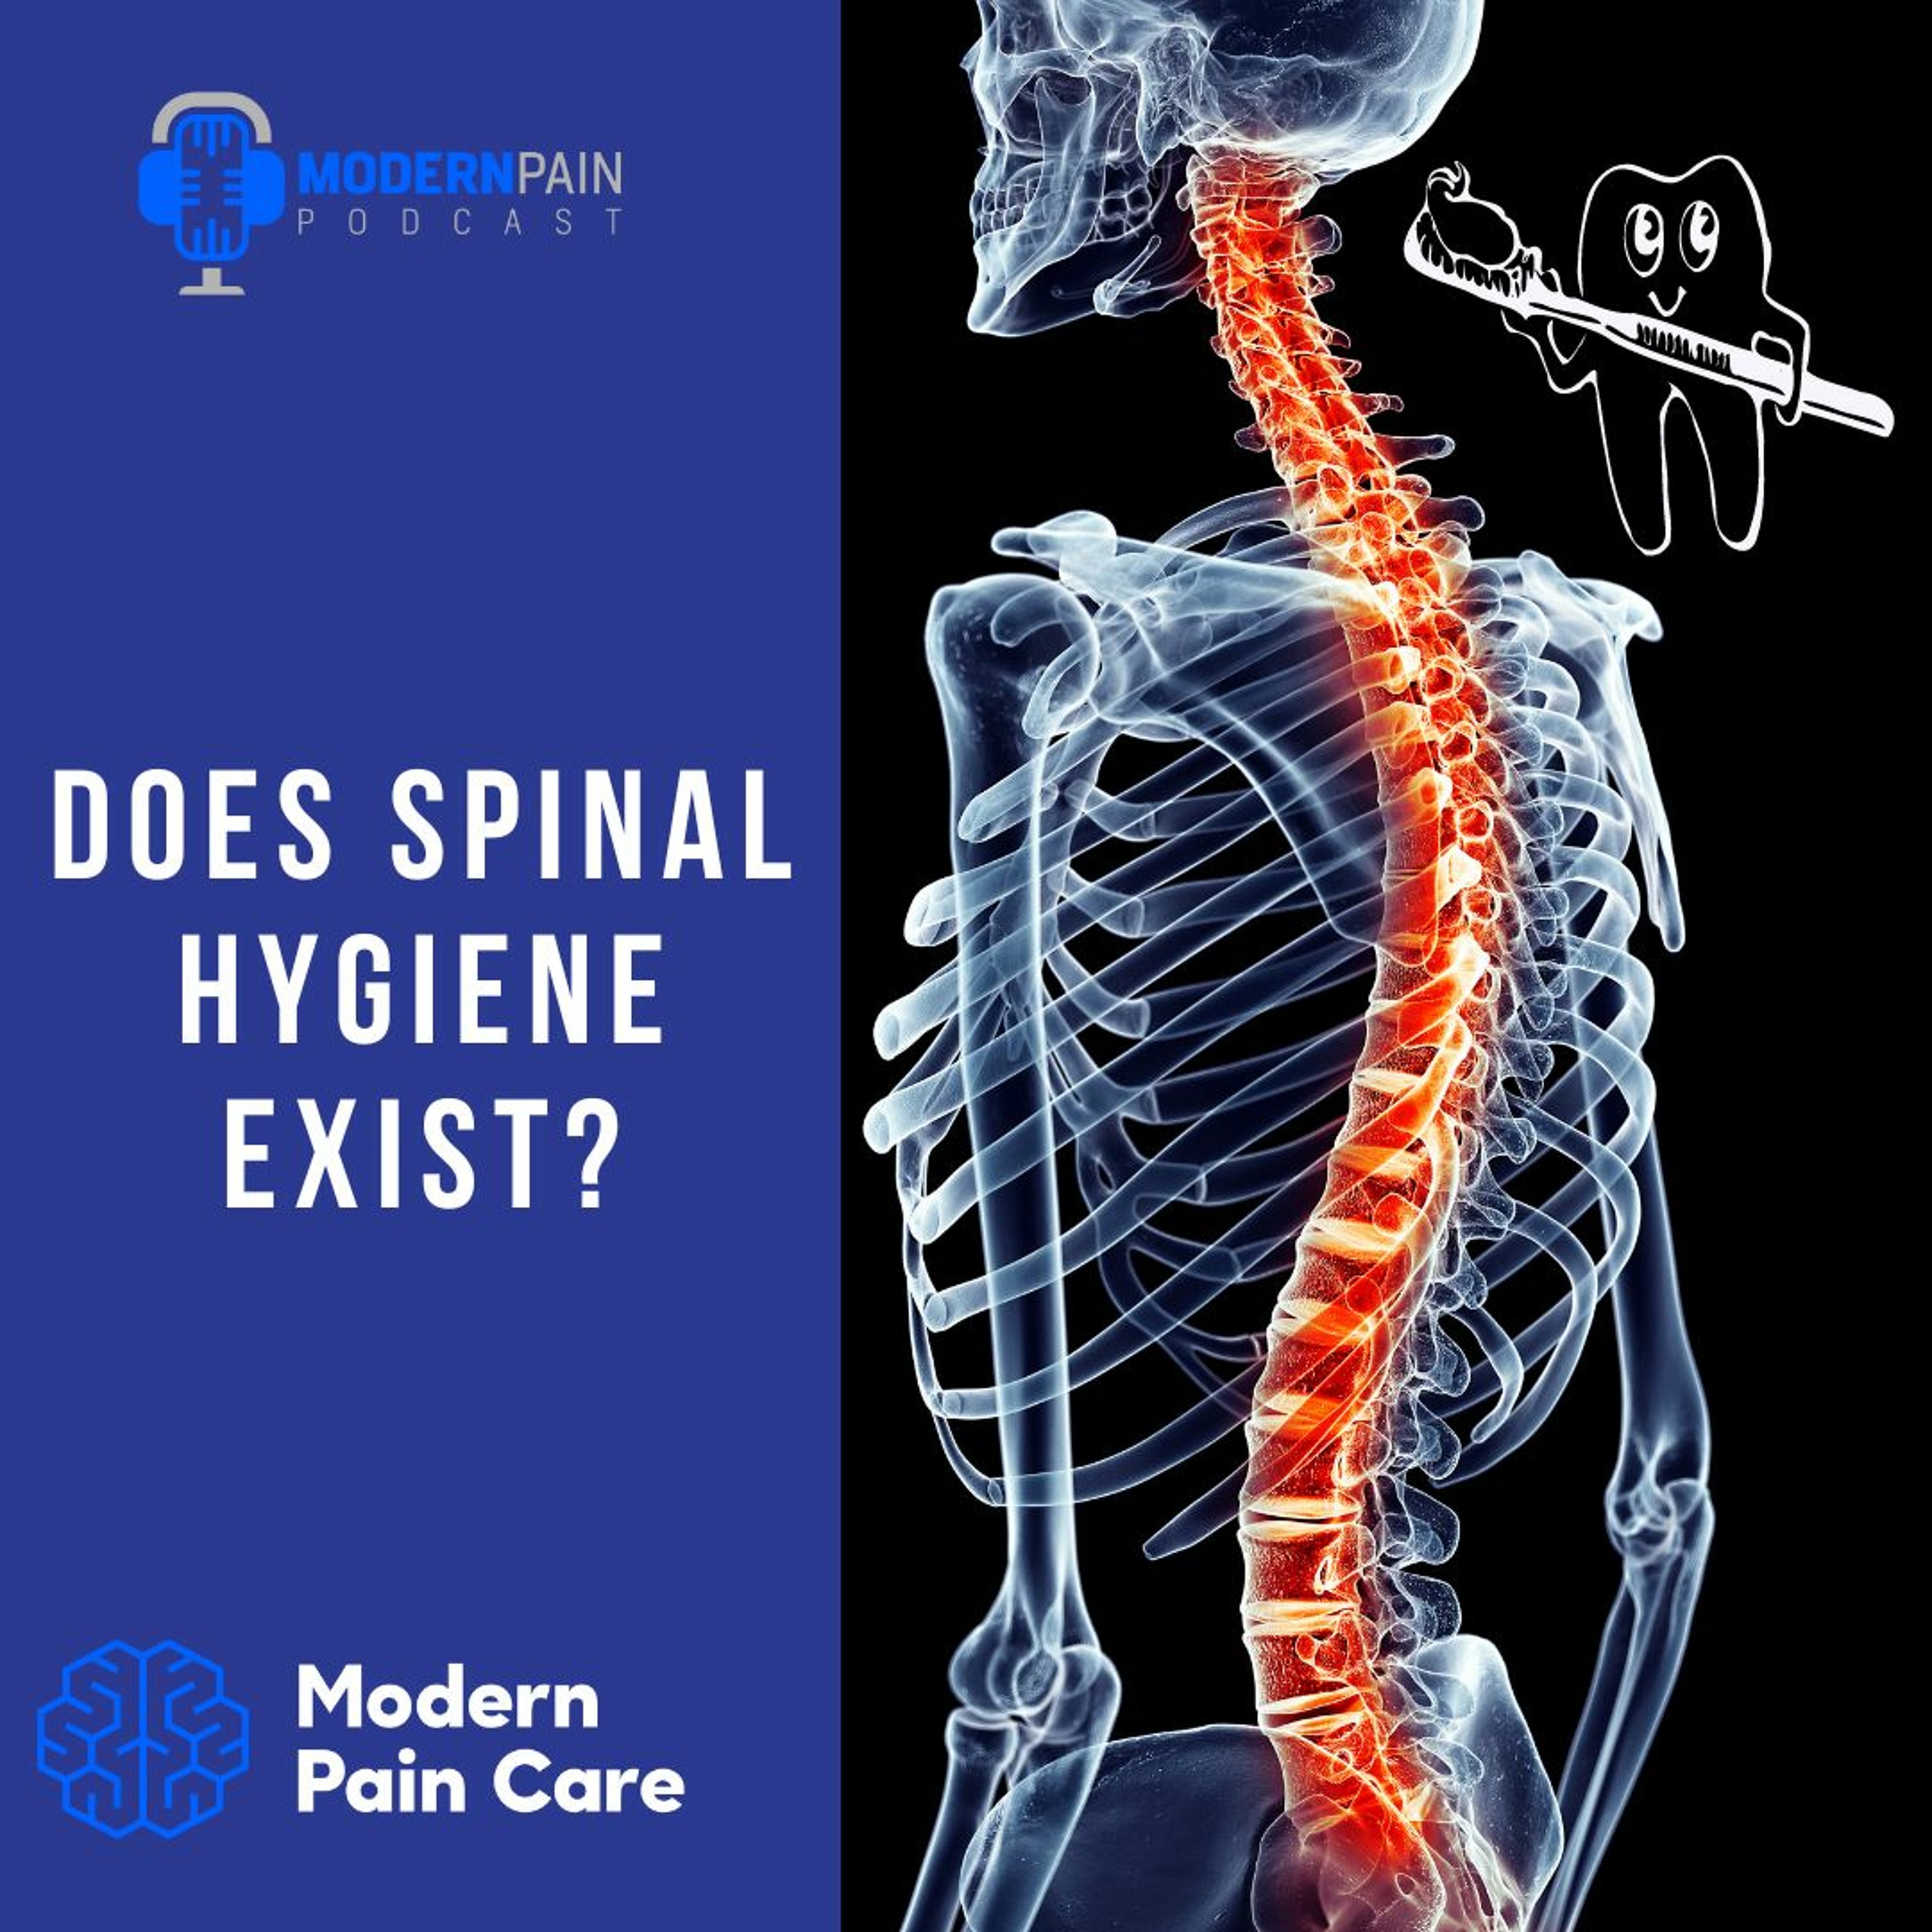 Does Spinal Hygiene Exist?